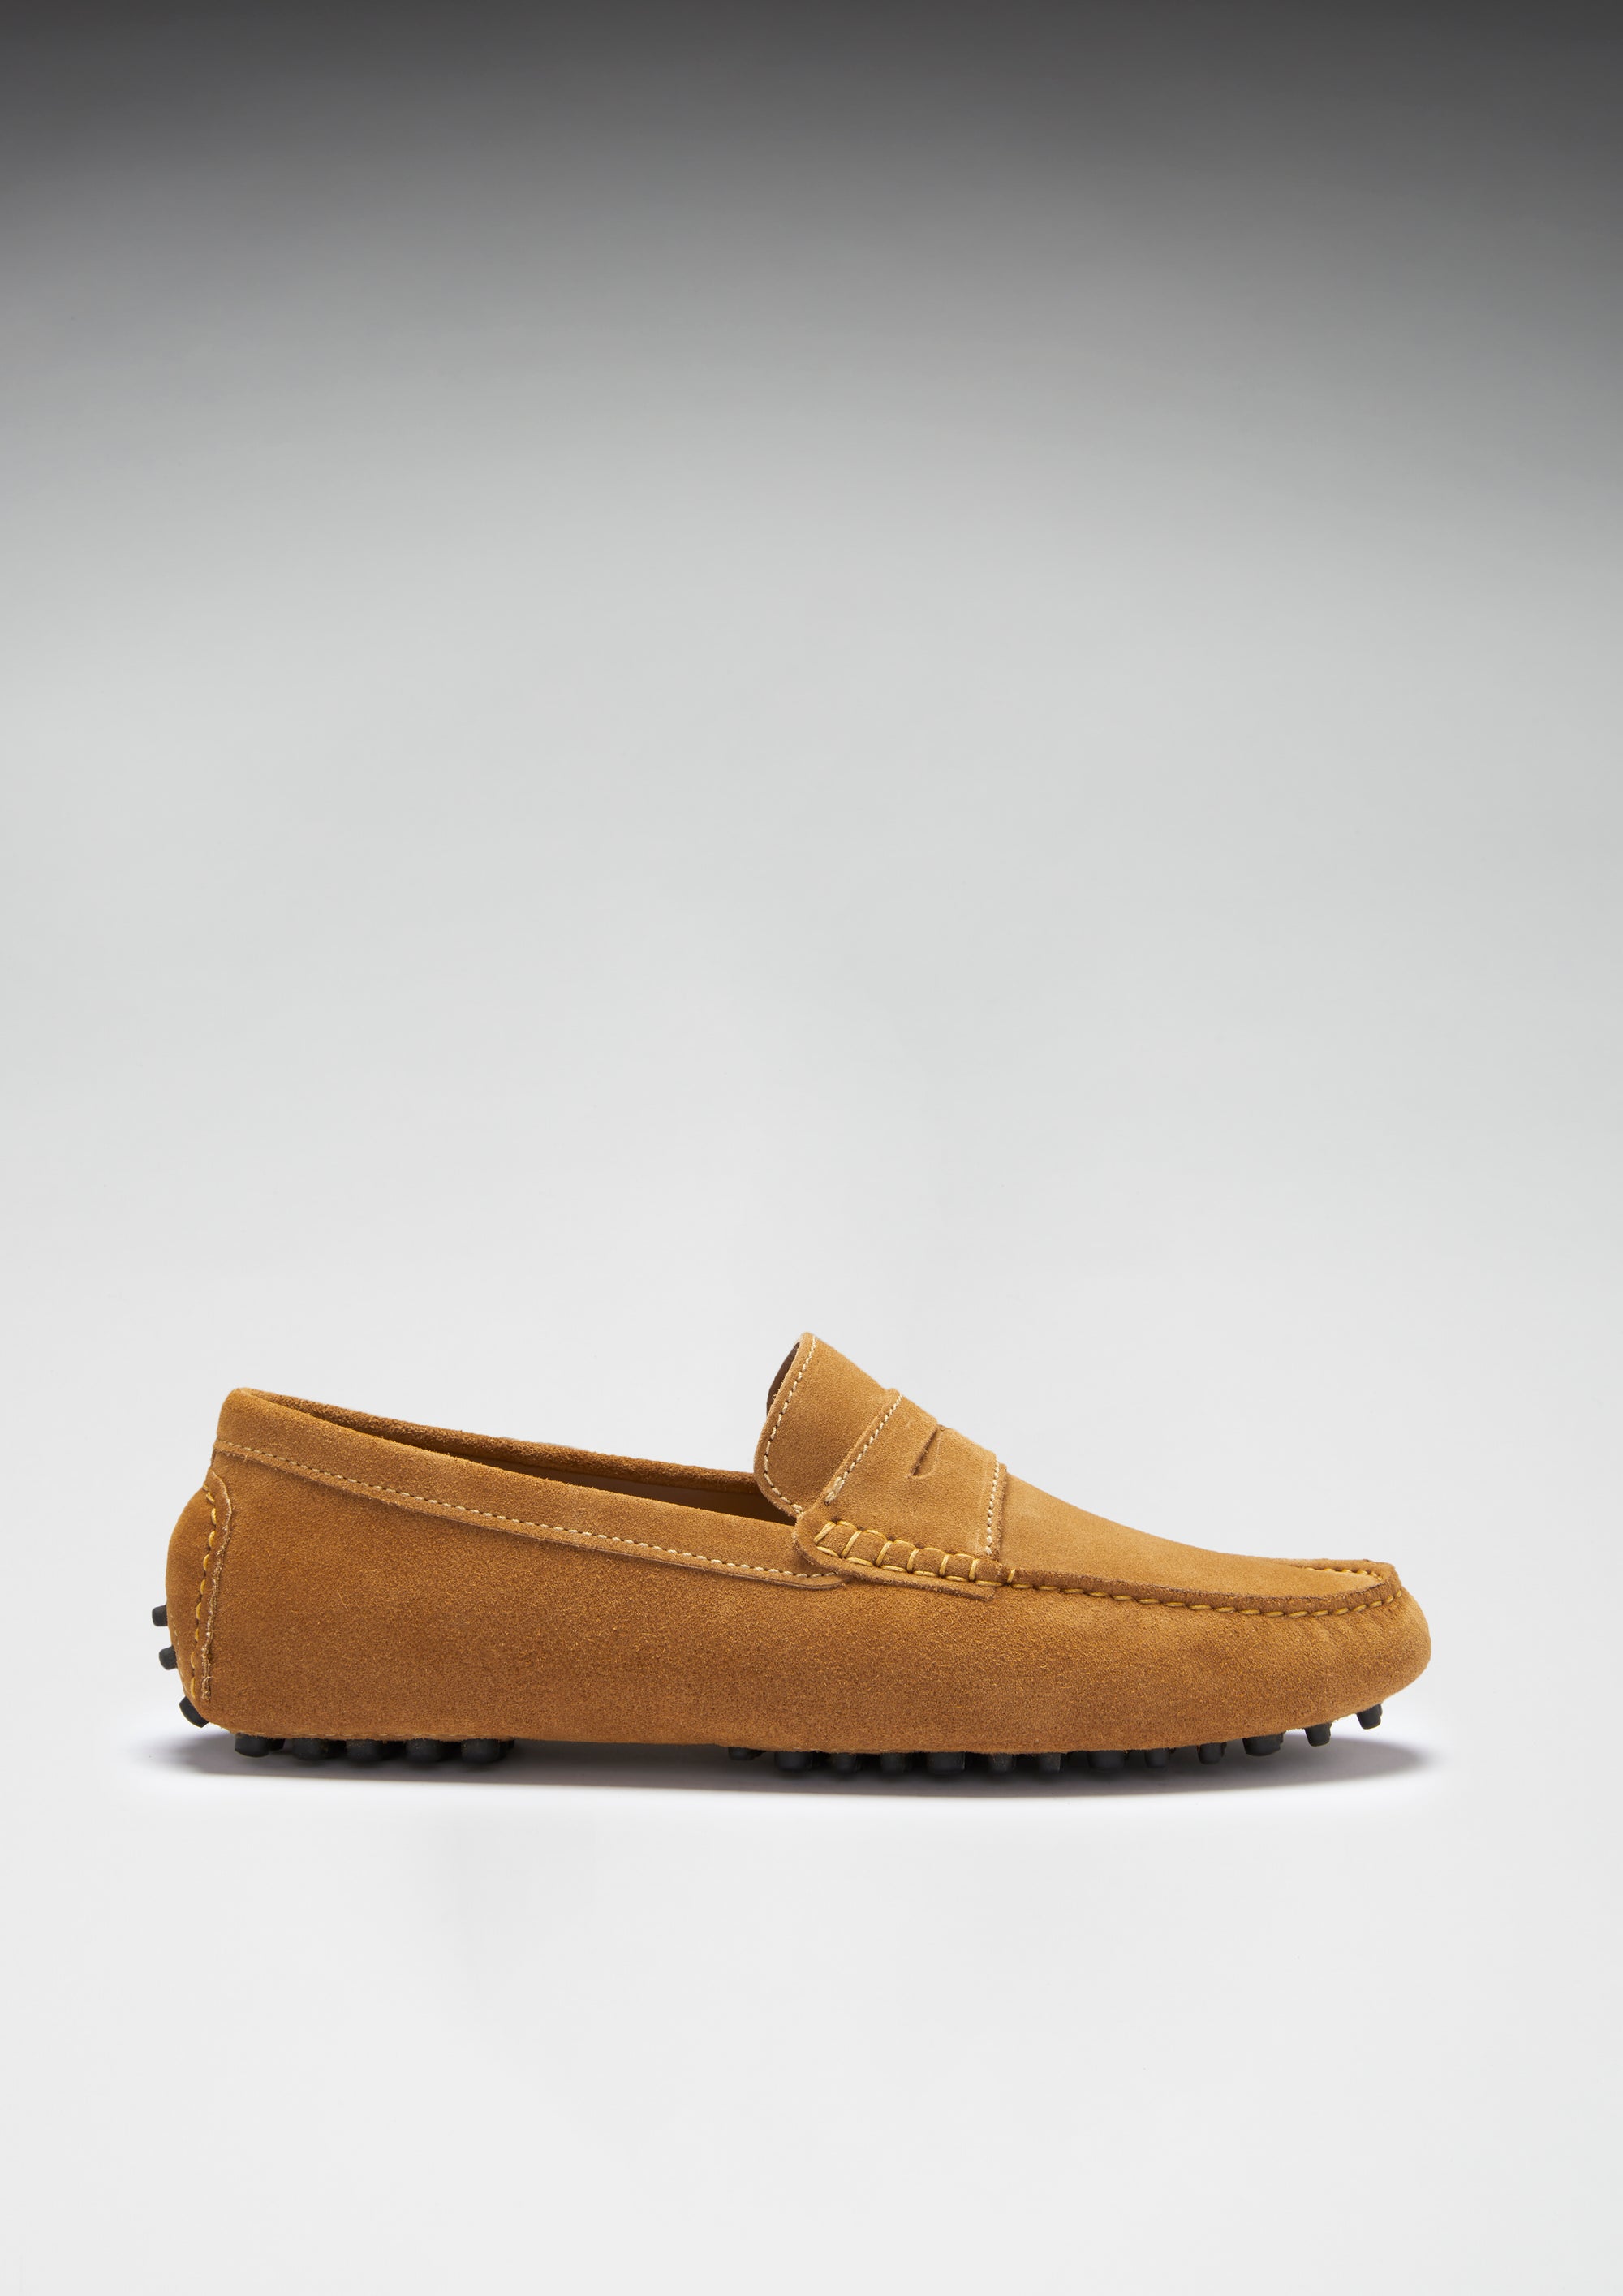 Penny Driving Loafers, tobacco suede